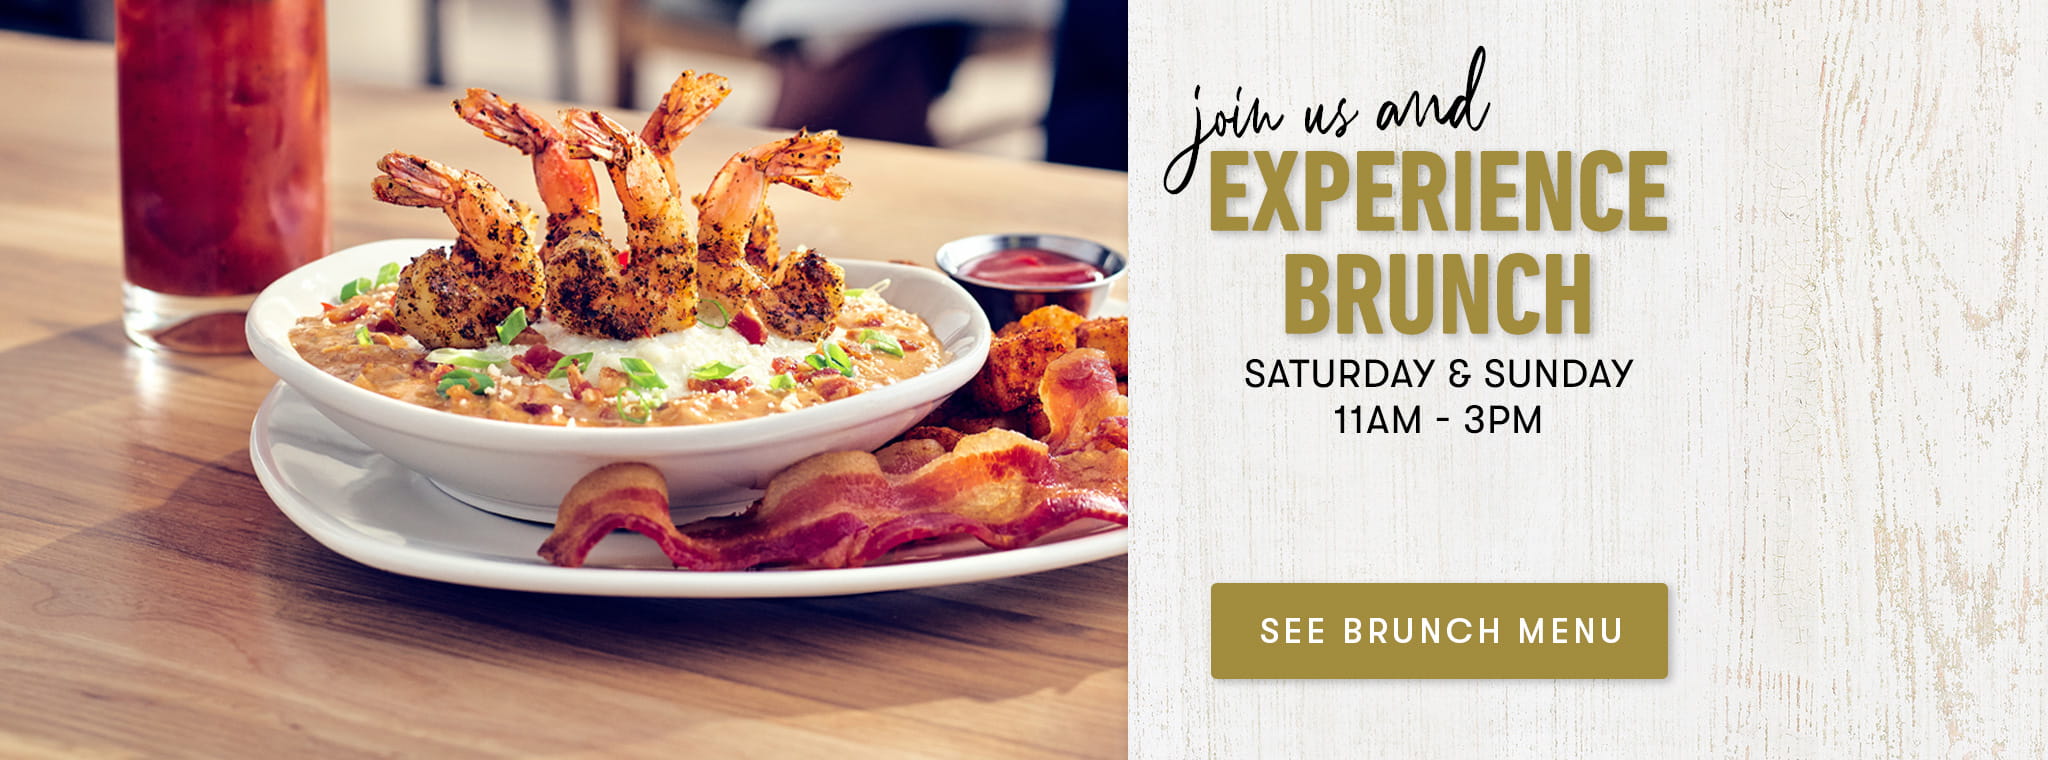 Join us and experience BRUNCH Saturday and Sunday 11am-3pm